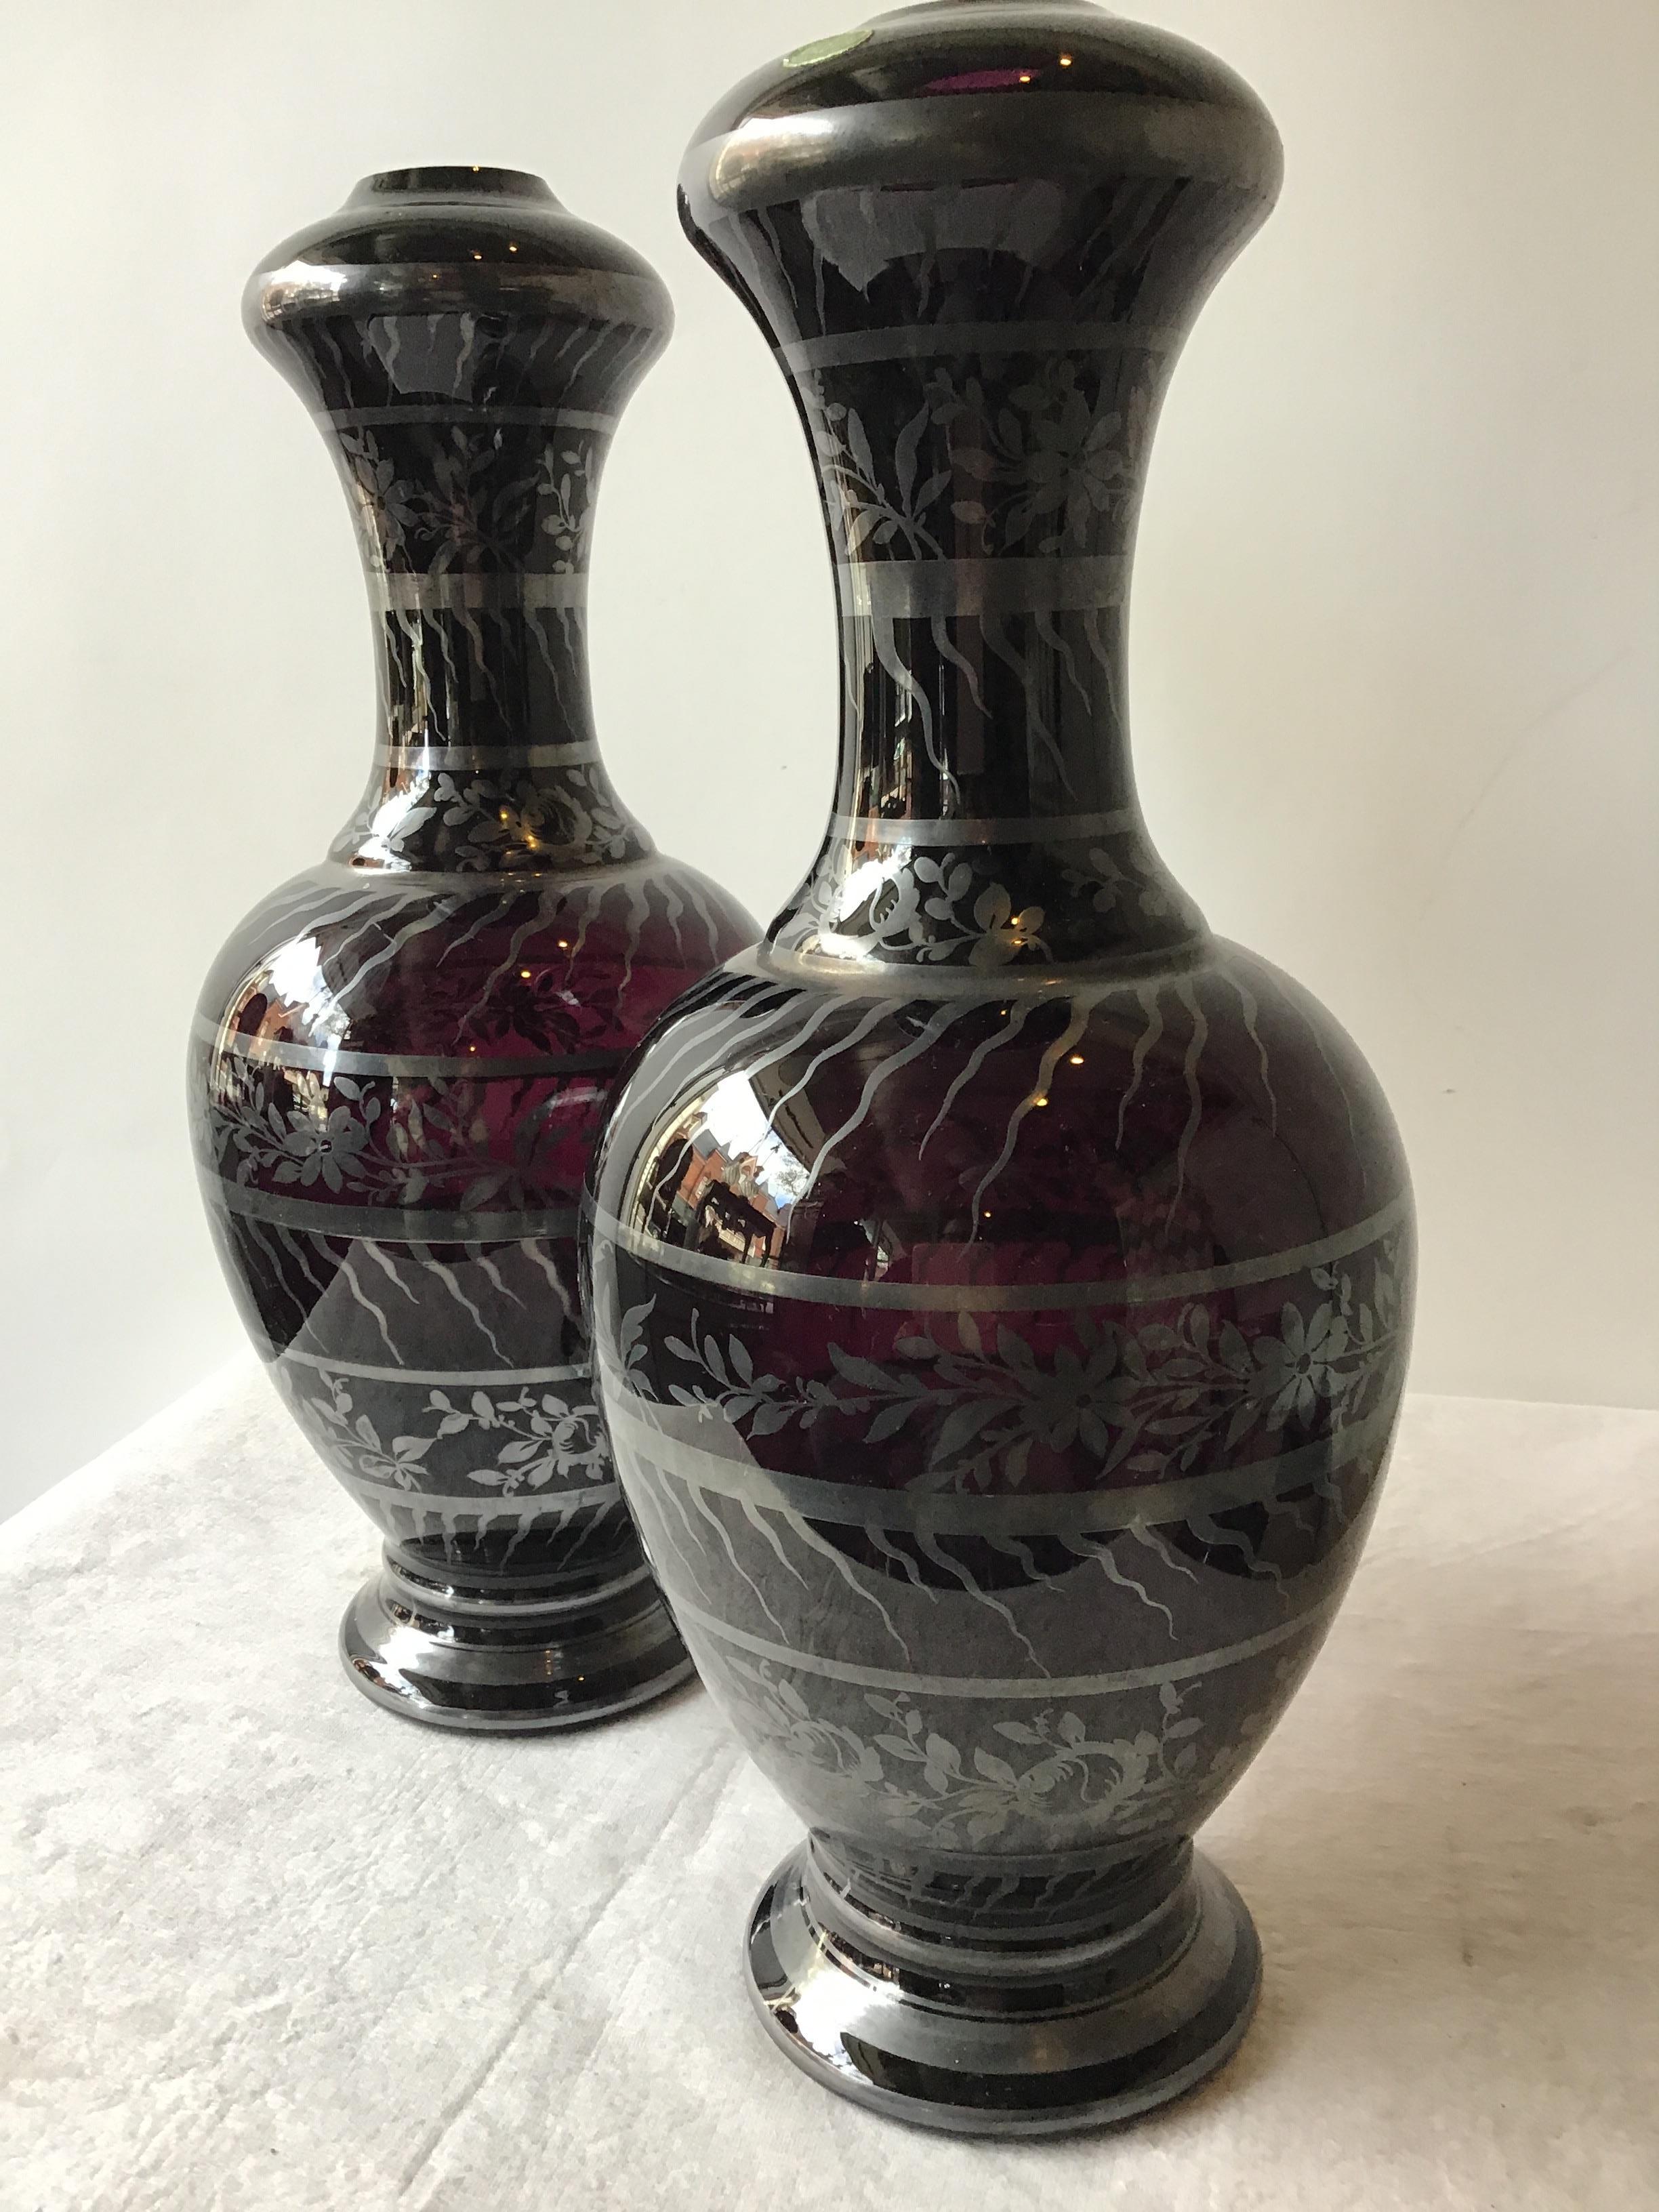 Pair of wine colored silver overlay 1960s Murano lamp bodies by Balboa.
These lamp bodies need all parts in order to be turned into working lights.